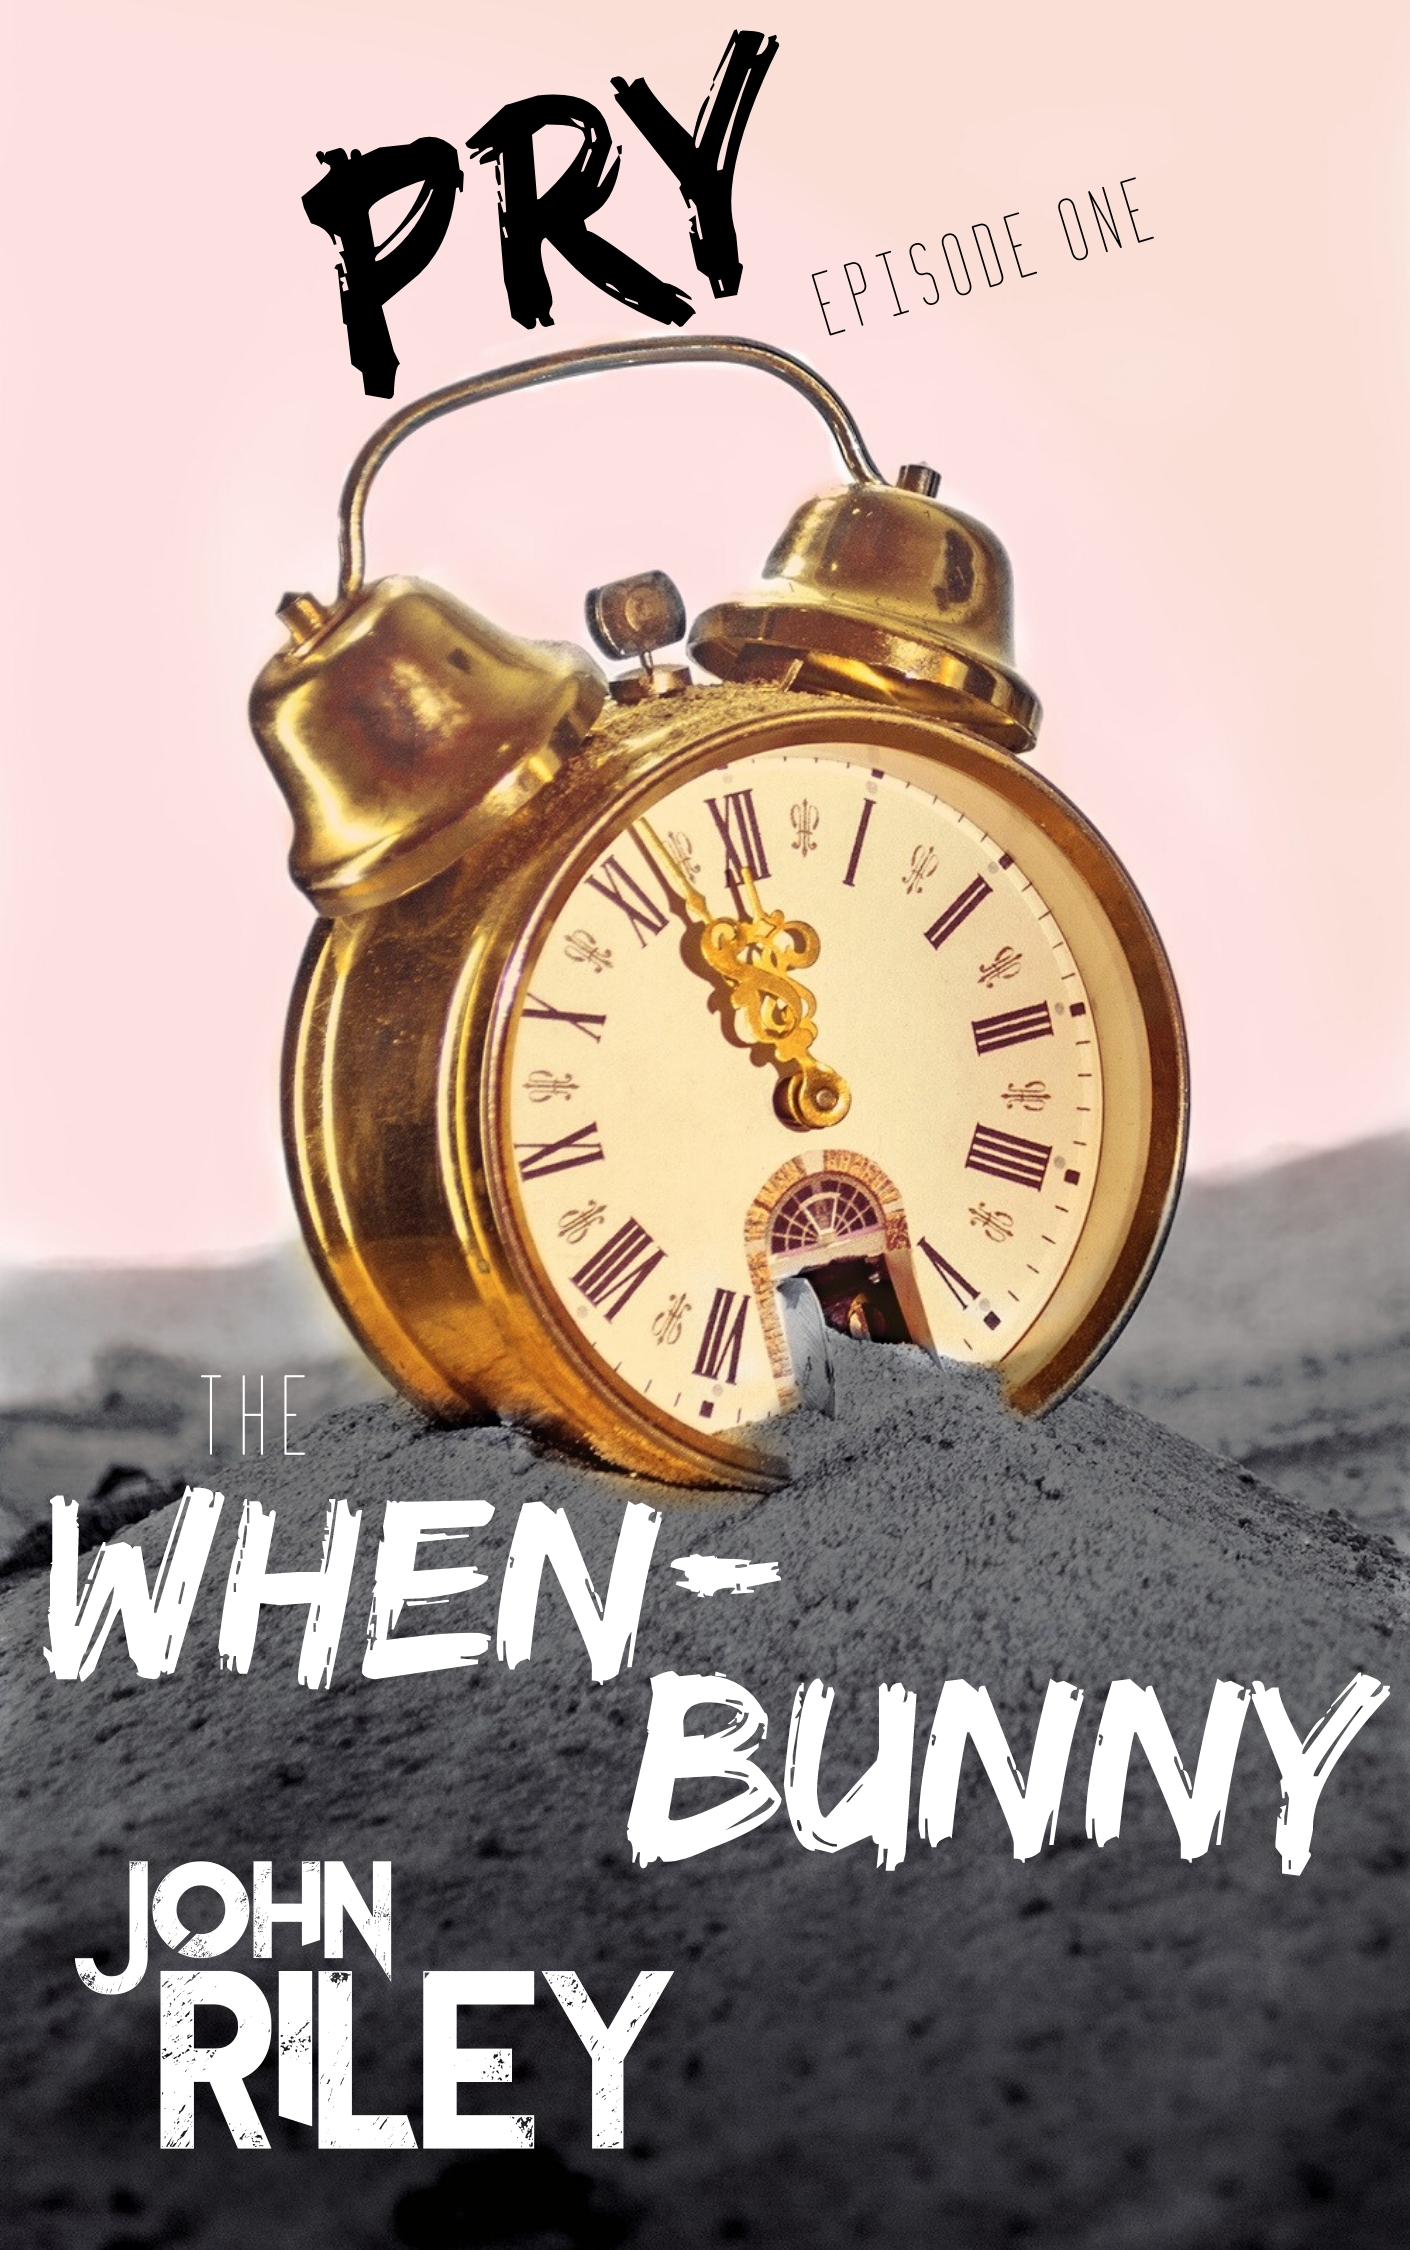 FREE: Pry. Episode One the When-Bunny by John Riley